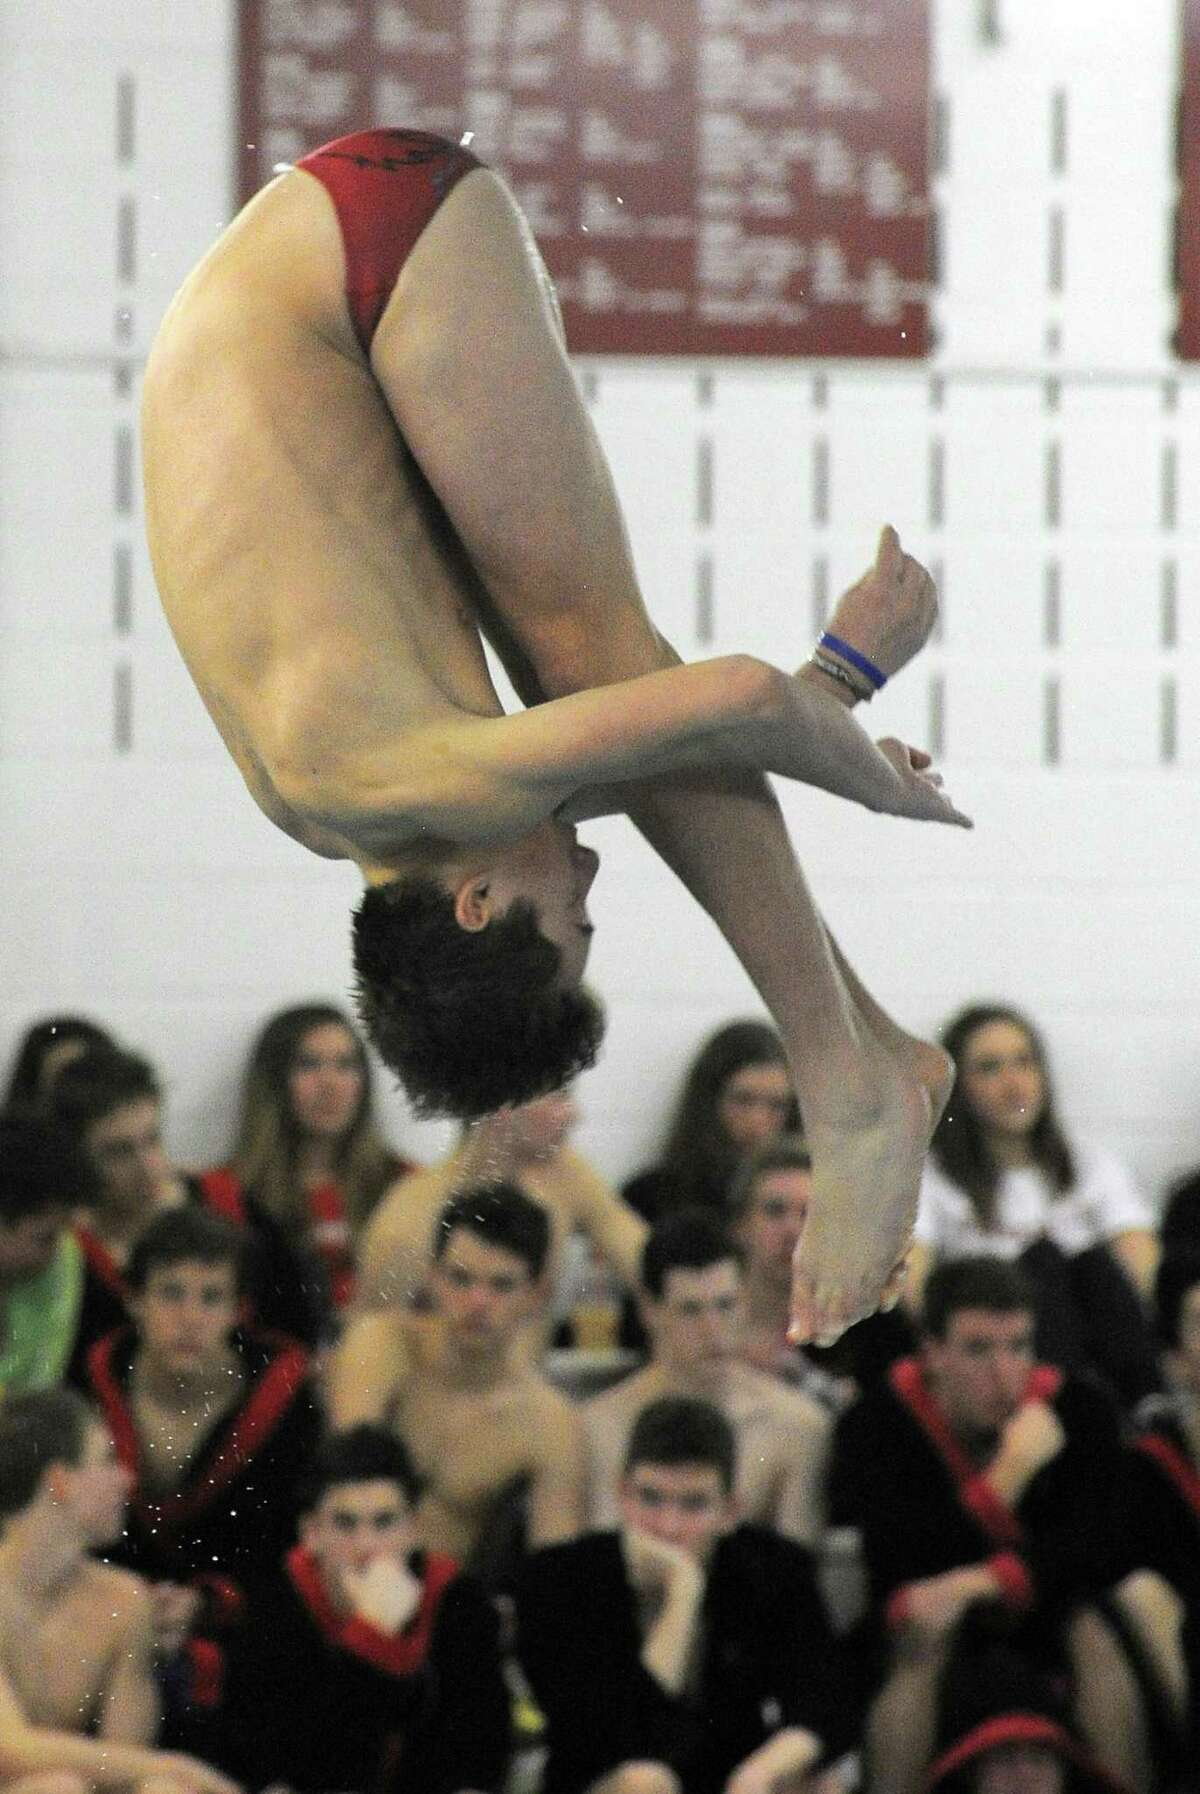 Greenwich Justin Sodokoff compete in the Diving Event in a non conference boys swim meet against Fairfield Prep at Greenwich High School on Jan. 28, 2017. Fairfield Prep defeated Greenwich 98-88.